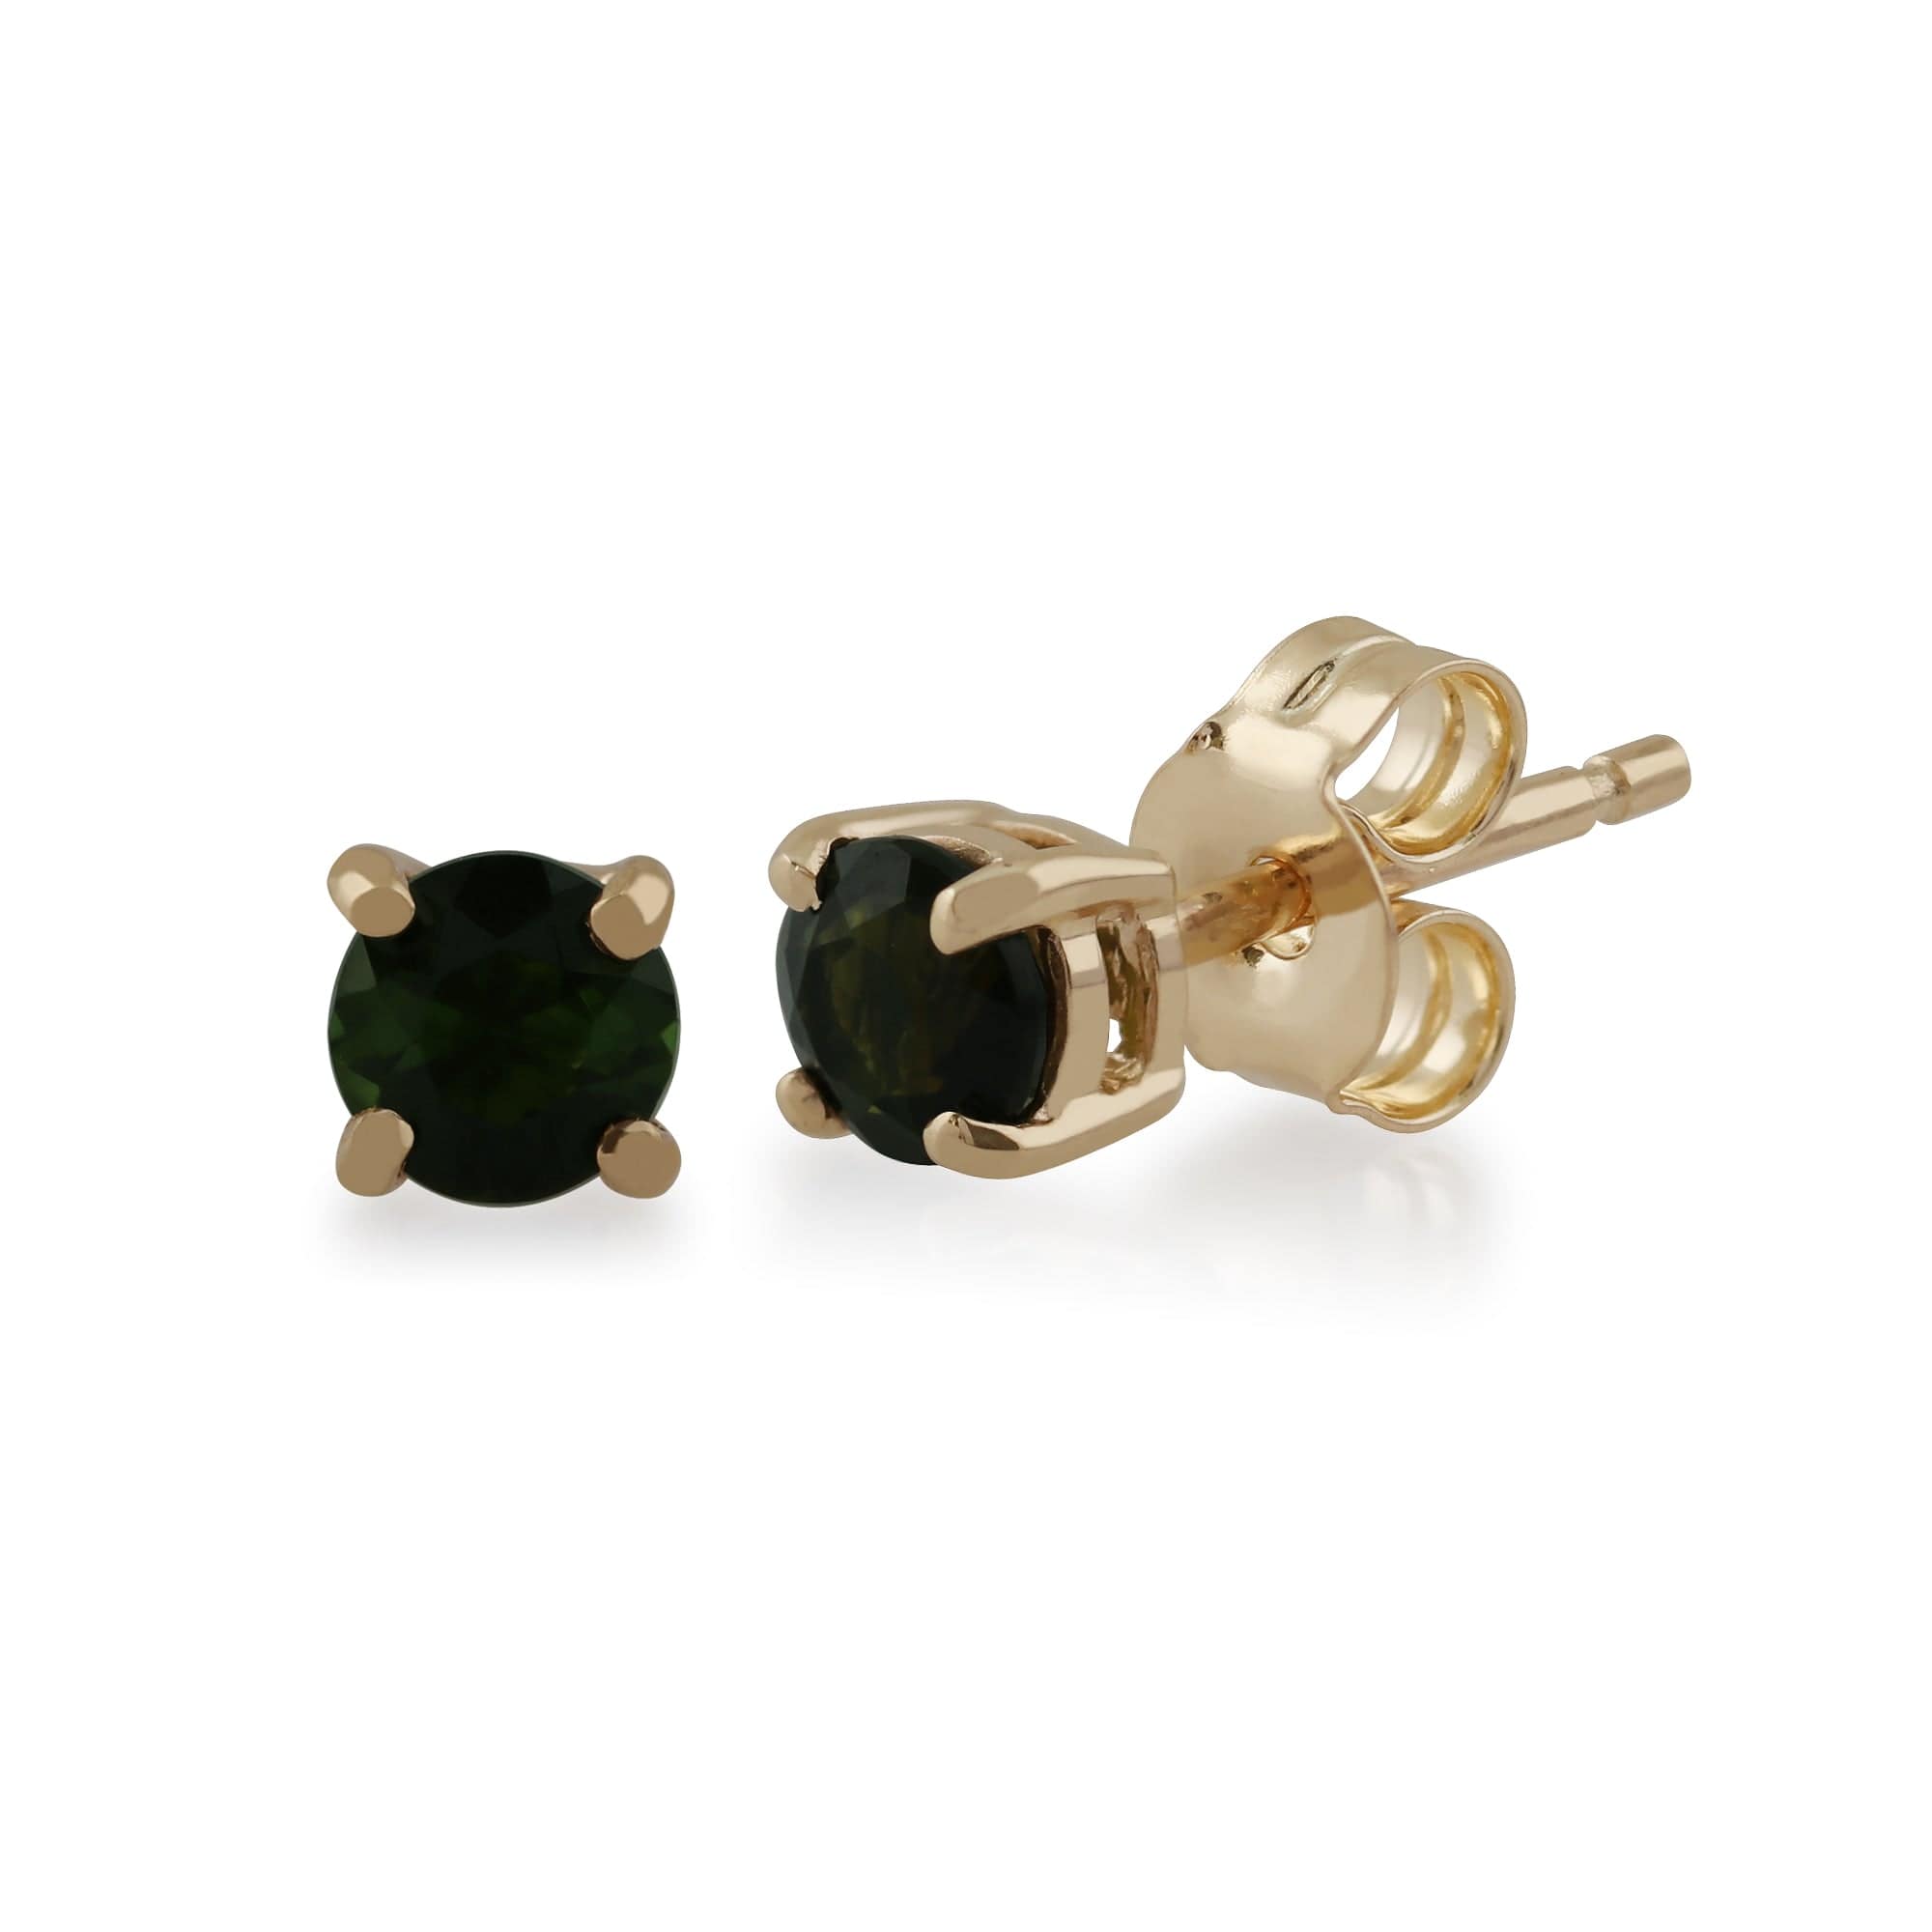 Classic Round Green Tourmaline Stud Earrings with Detachable Diamond Square Earrings Jacket Set in 9ct Yellow Gold - Gemondo